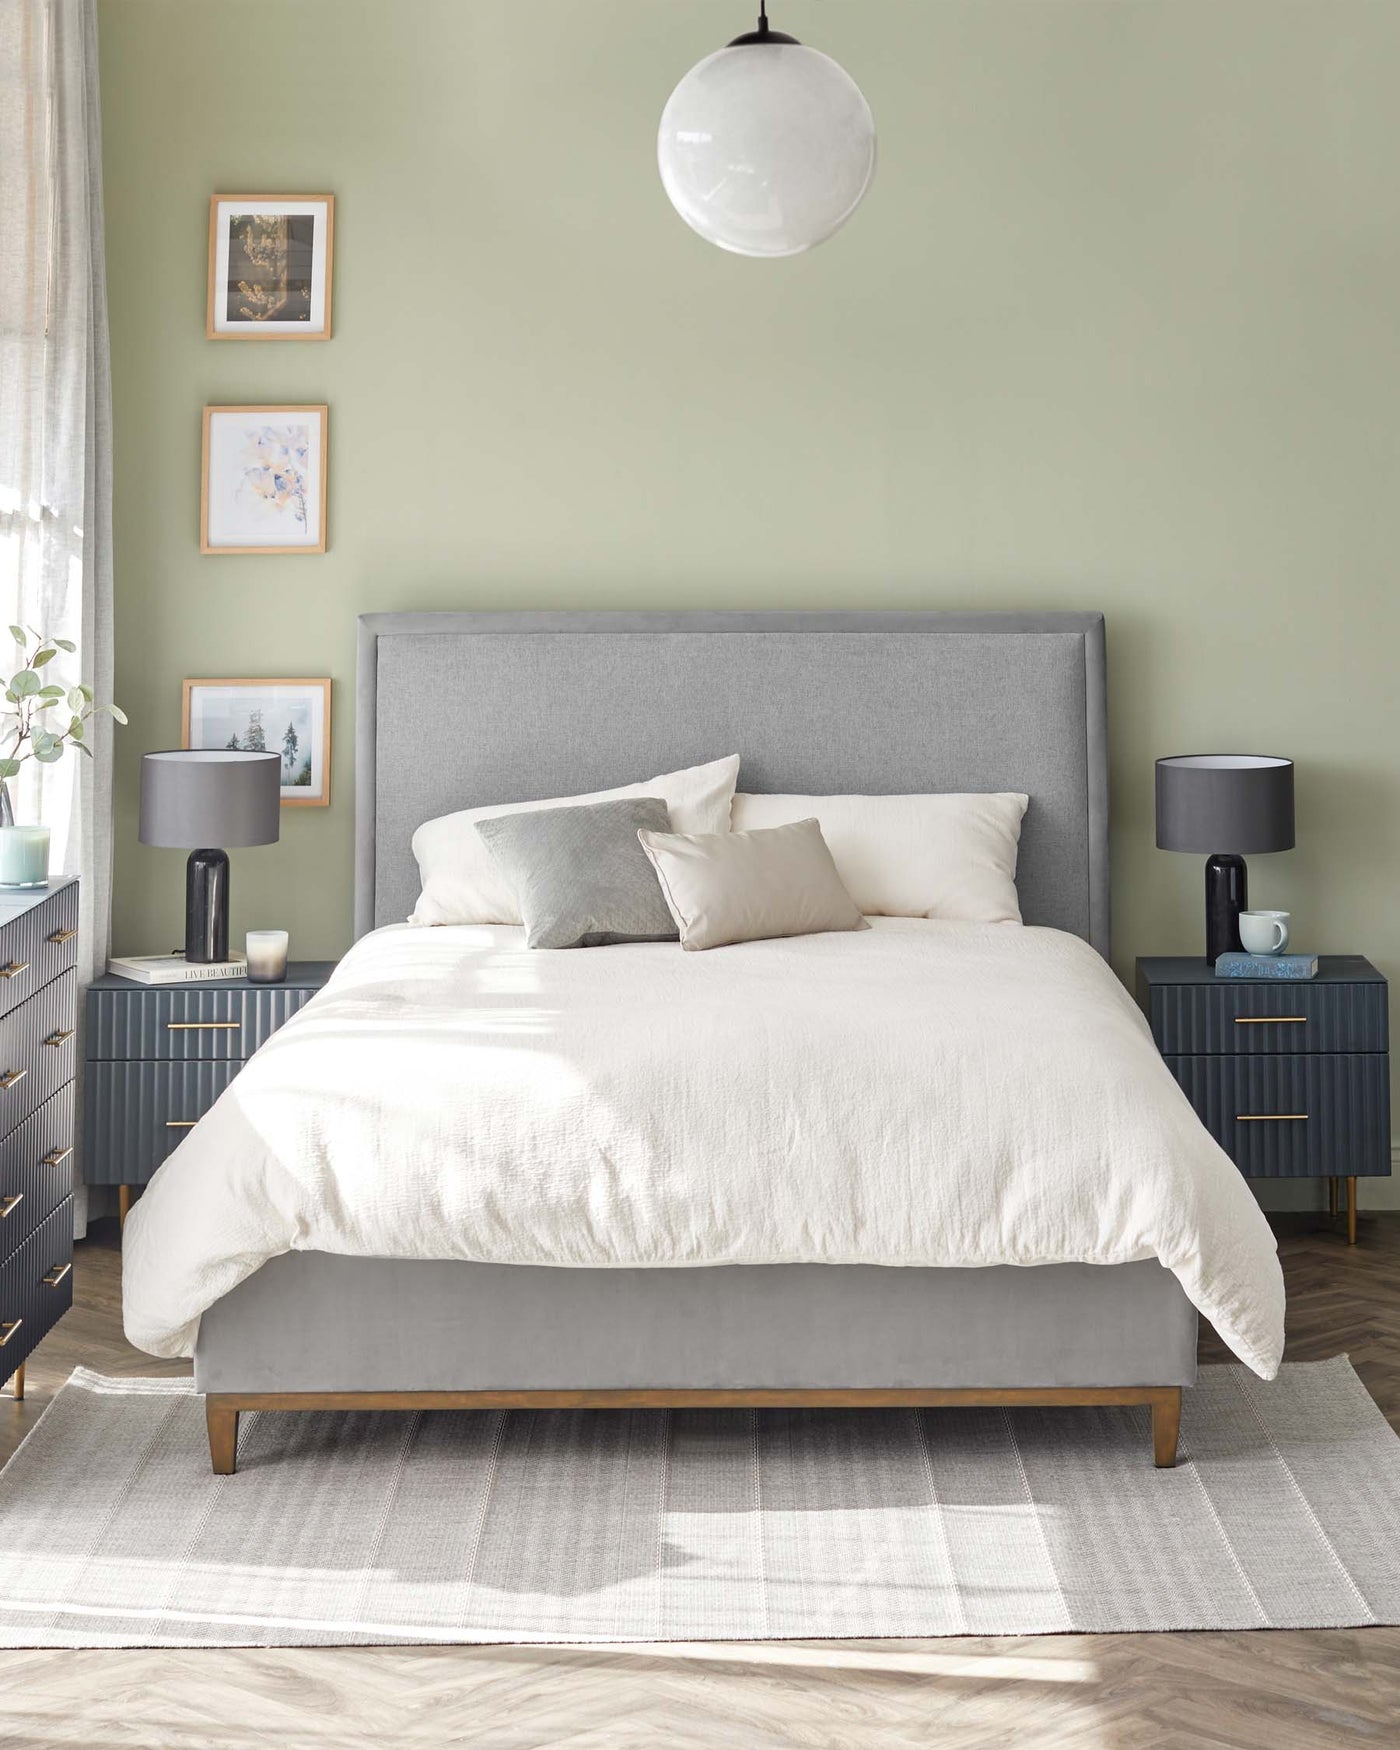 A modern bedroom featuring a grey upholstered bed frame with a high headboard, two dark grey bedside tables with brass handles, and a white area rug underneath the bed. The scene is complemented by minimalist decor, including framed wall art, a white globe pendant light, and simple bedding in neutral tones.